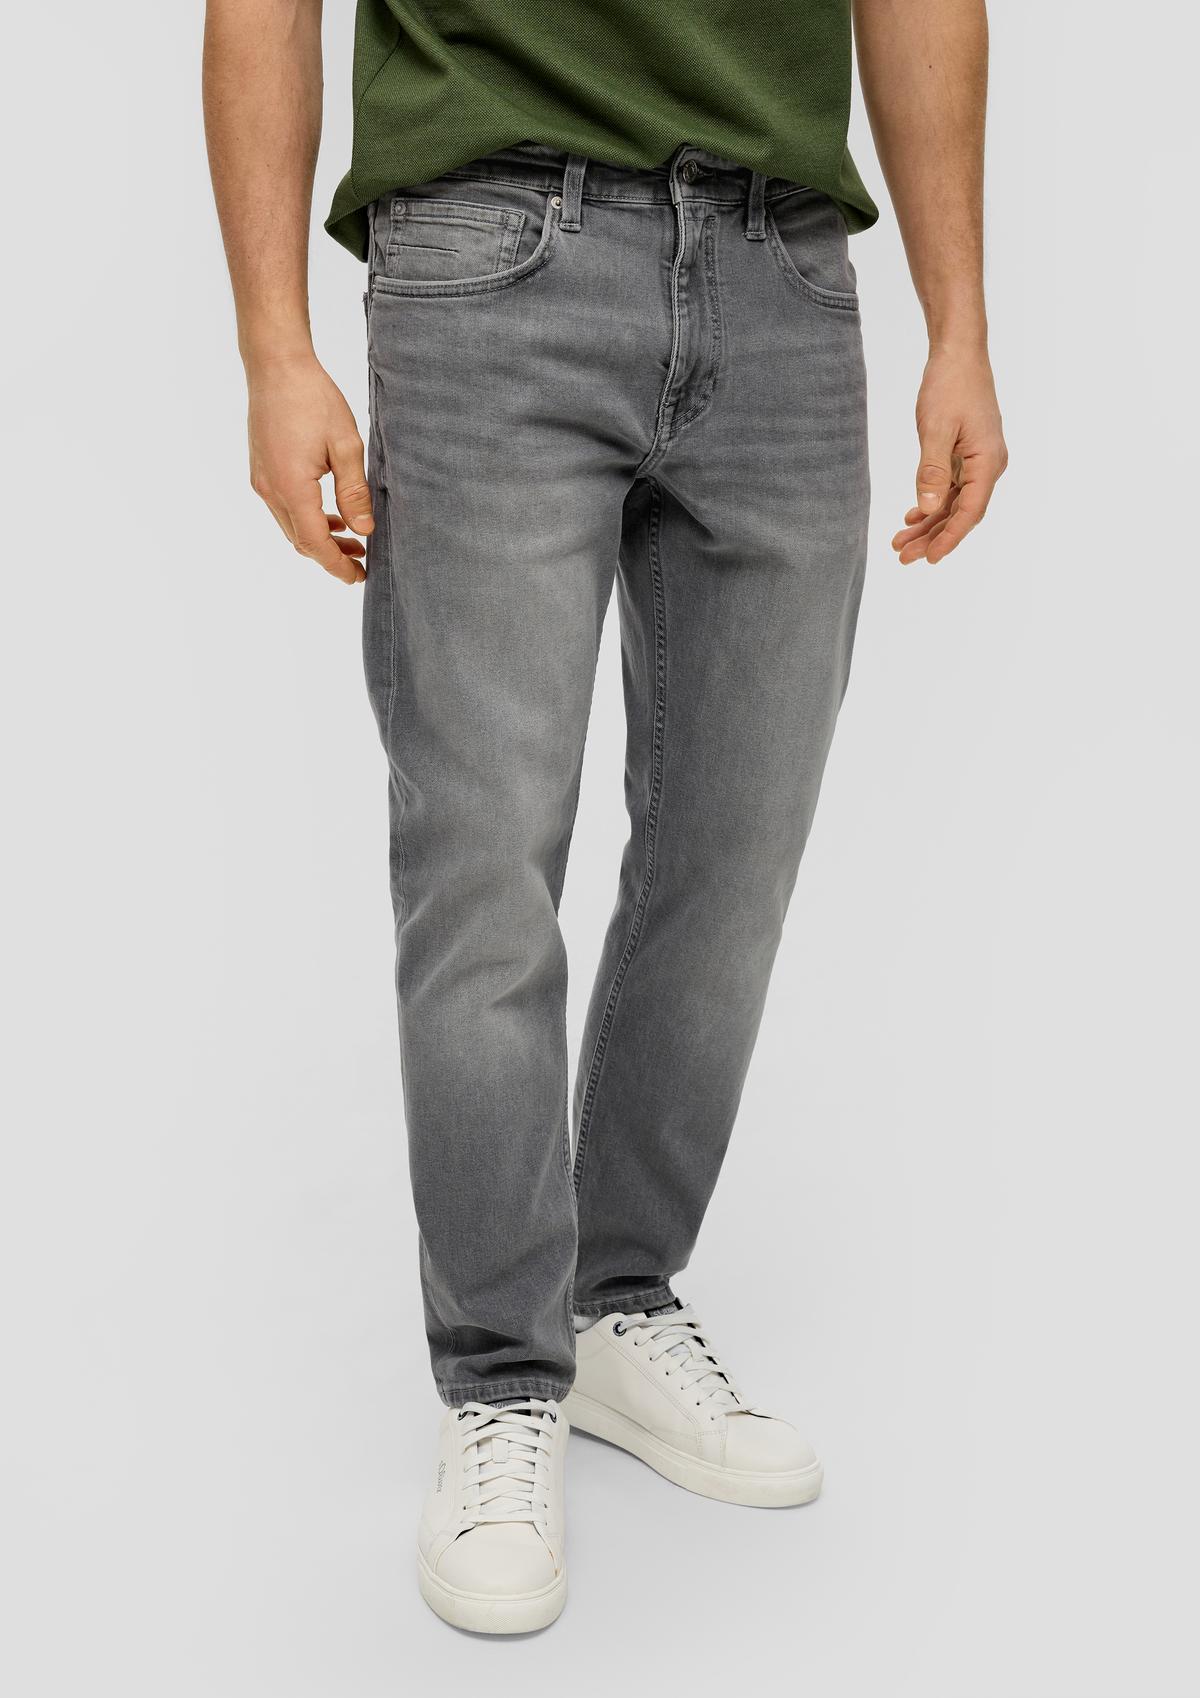 s.Oliver Jean Mauro / Regular Fit / taille mi-haute / Tapered Leg